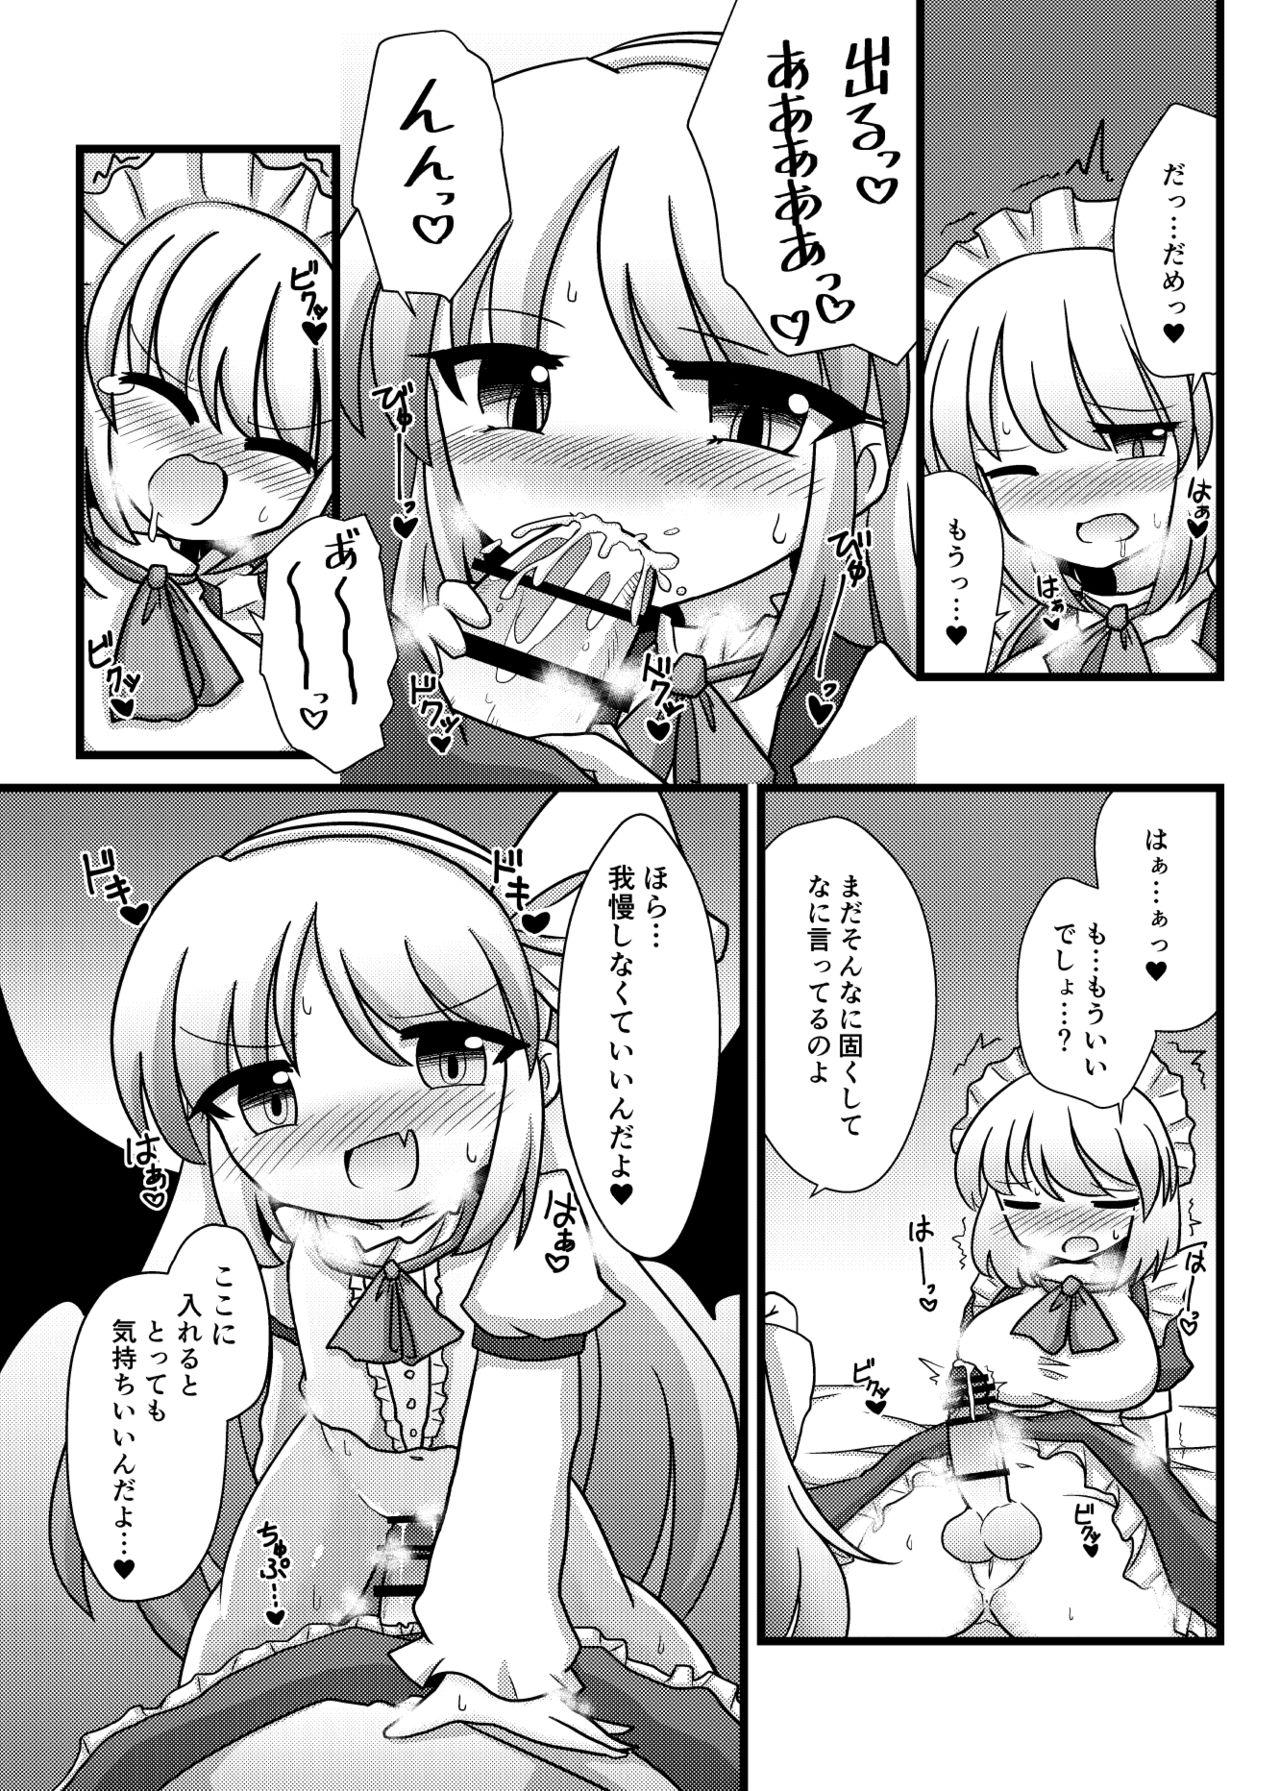 Thot 旧作エロ合同に寄稿した漫画 - Touhou project Ex Girlfriend - Page 3